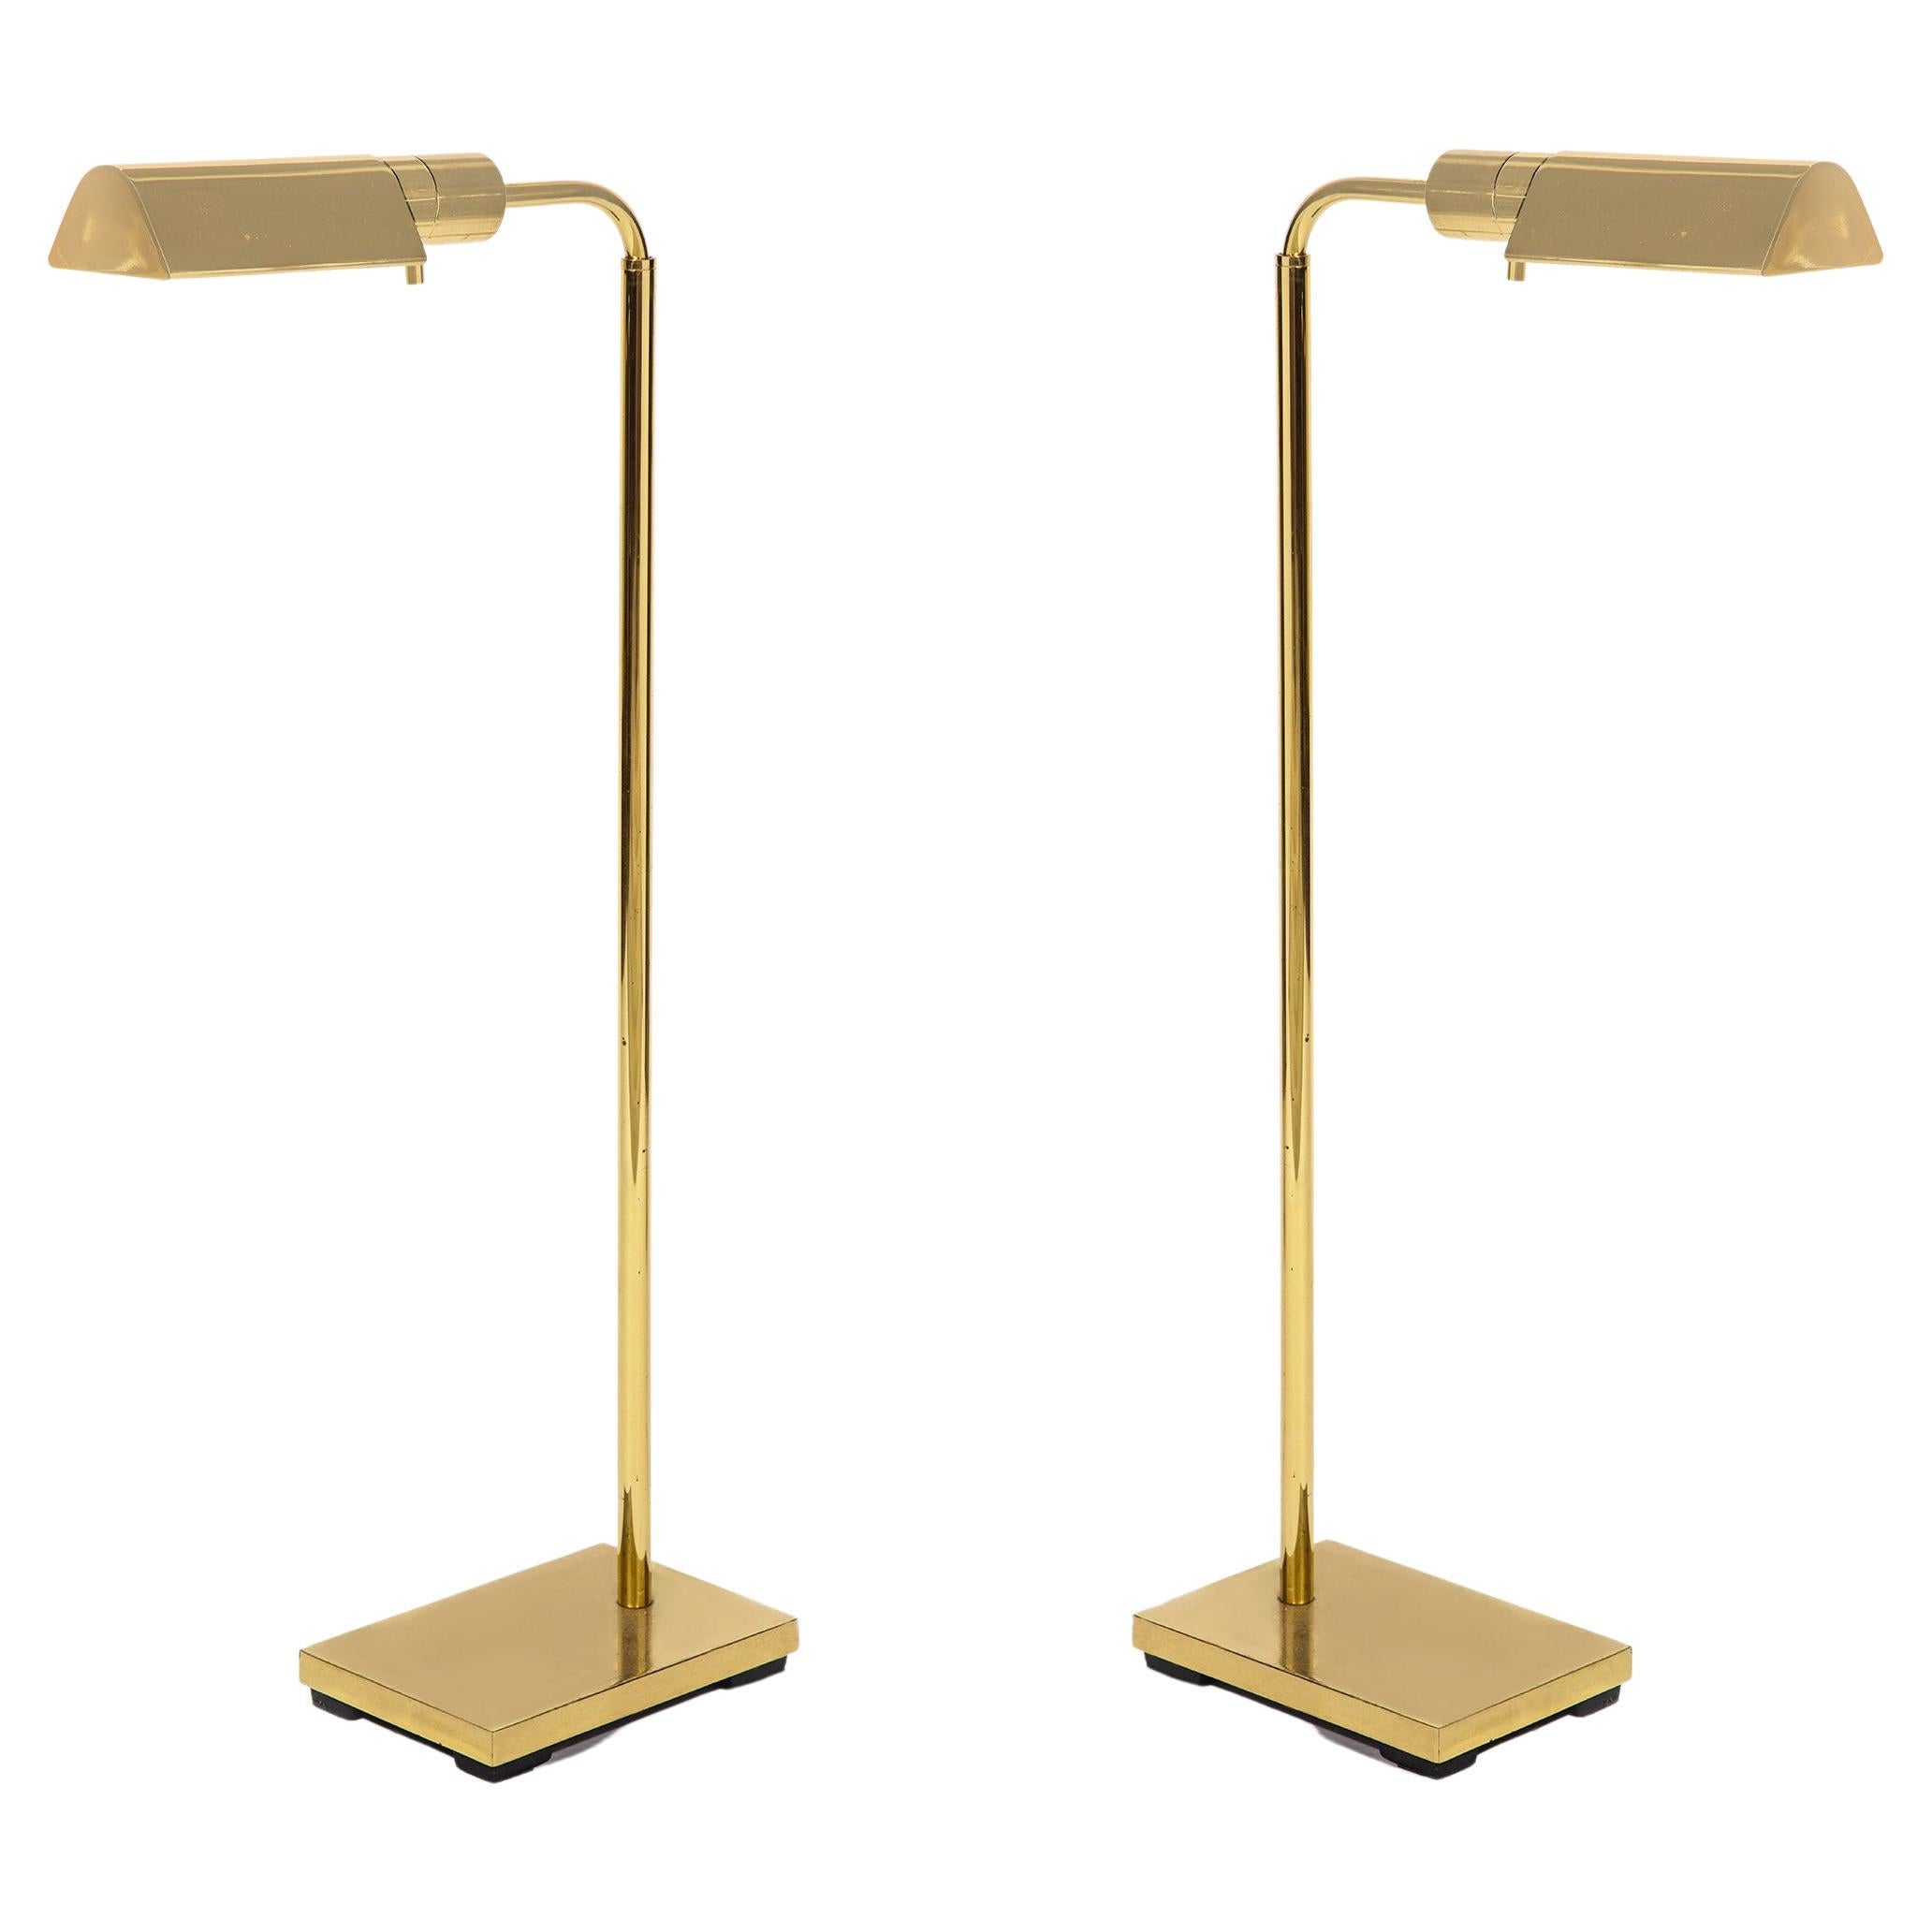 Pair of Brass Standing / Reading Lamps